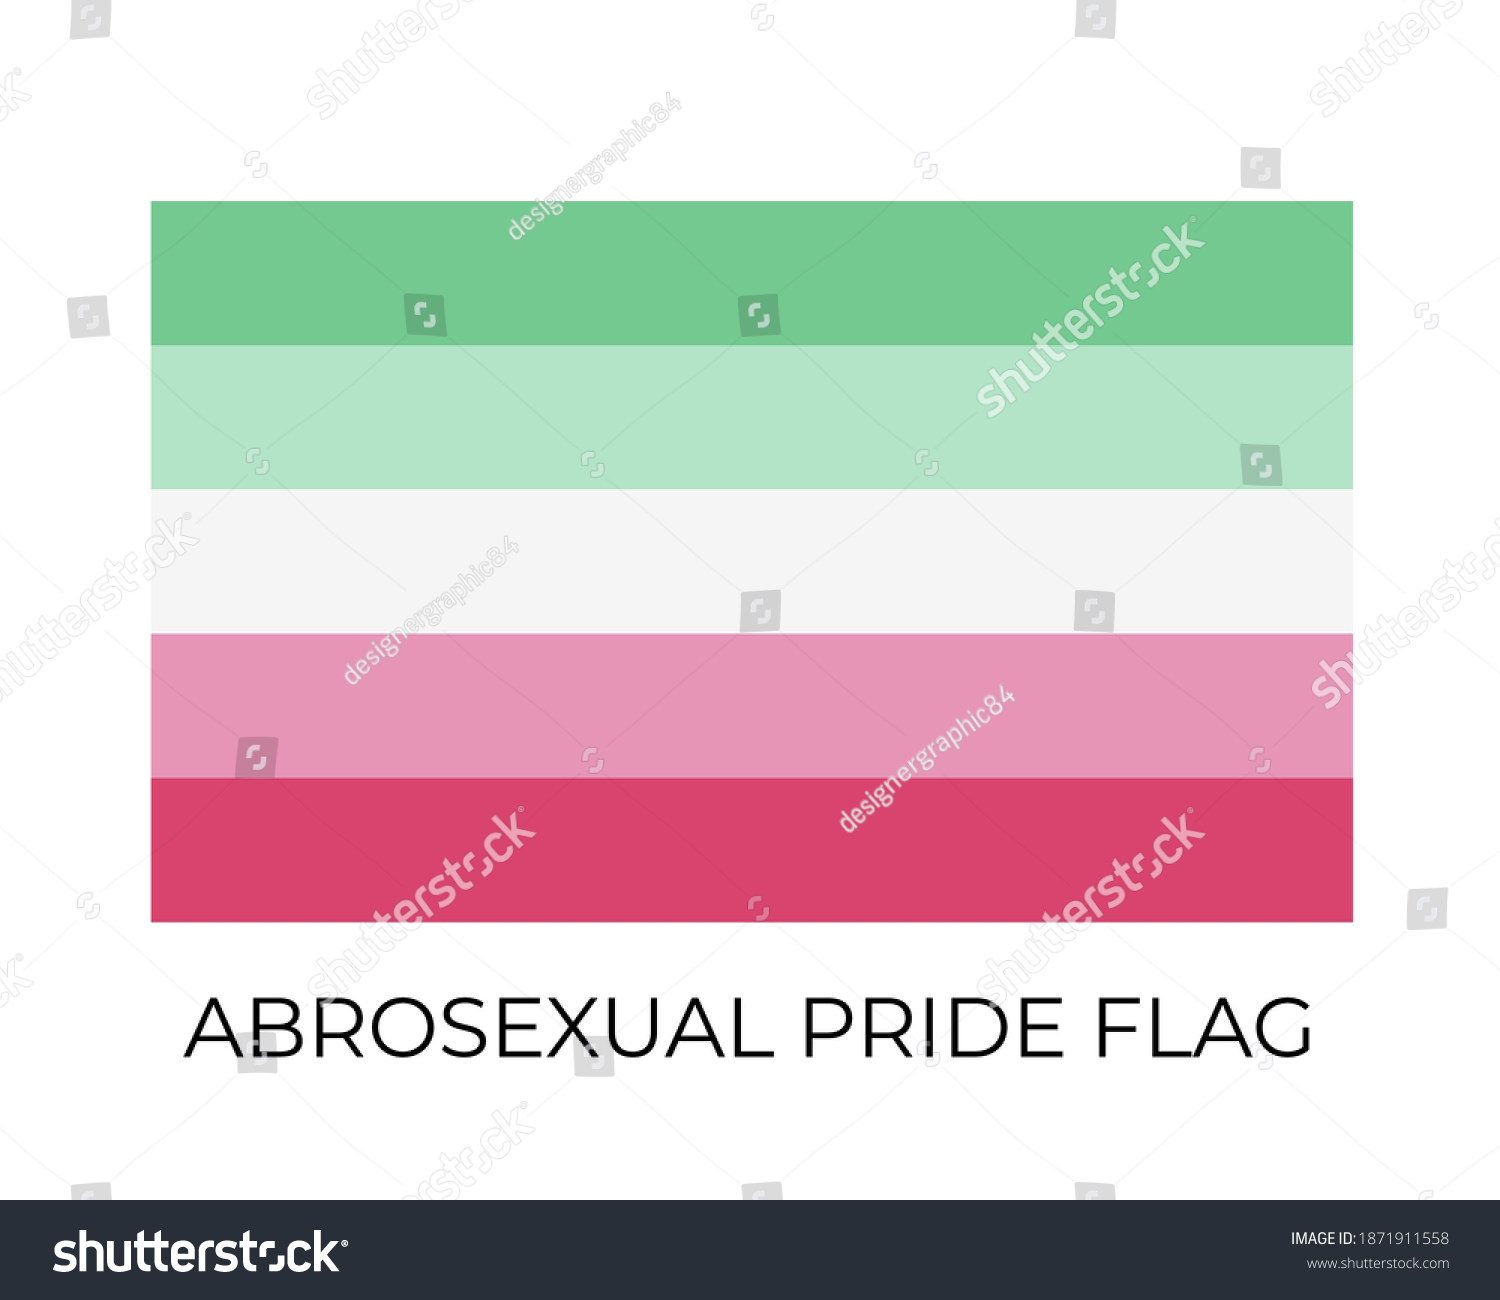 Abrosexual Pride Rainbow Flags Symbol Of Lgbt Royalty Free Stock Vector 1871911558 1013